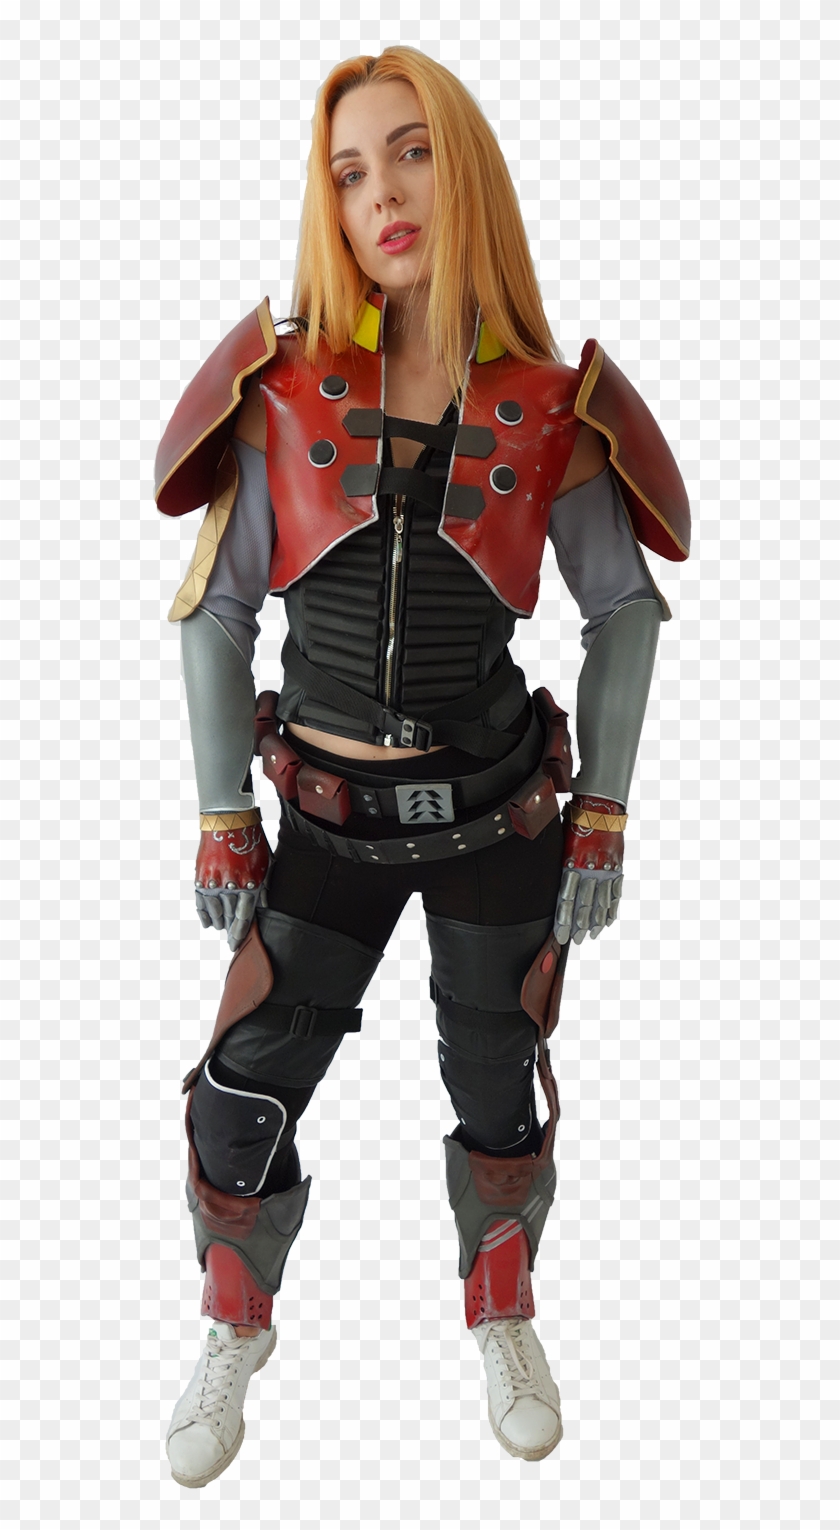 Hunter Costume - Cosplay Clipart #748097